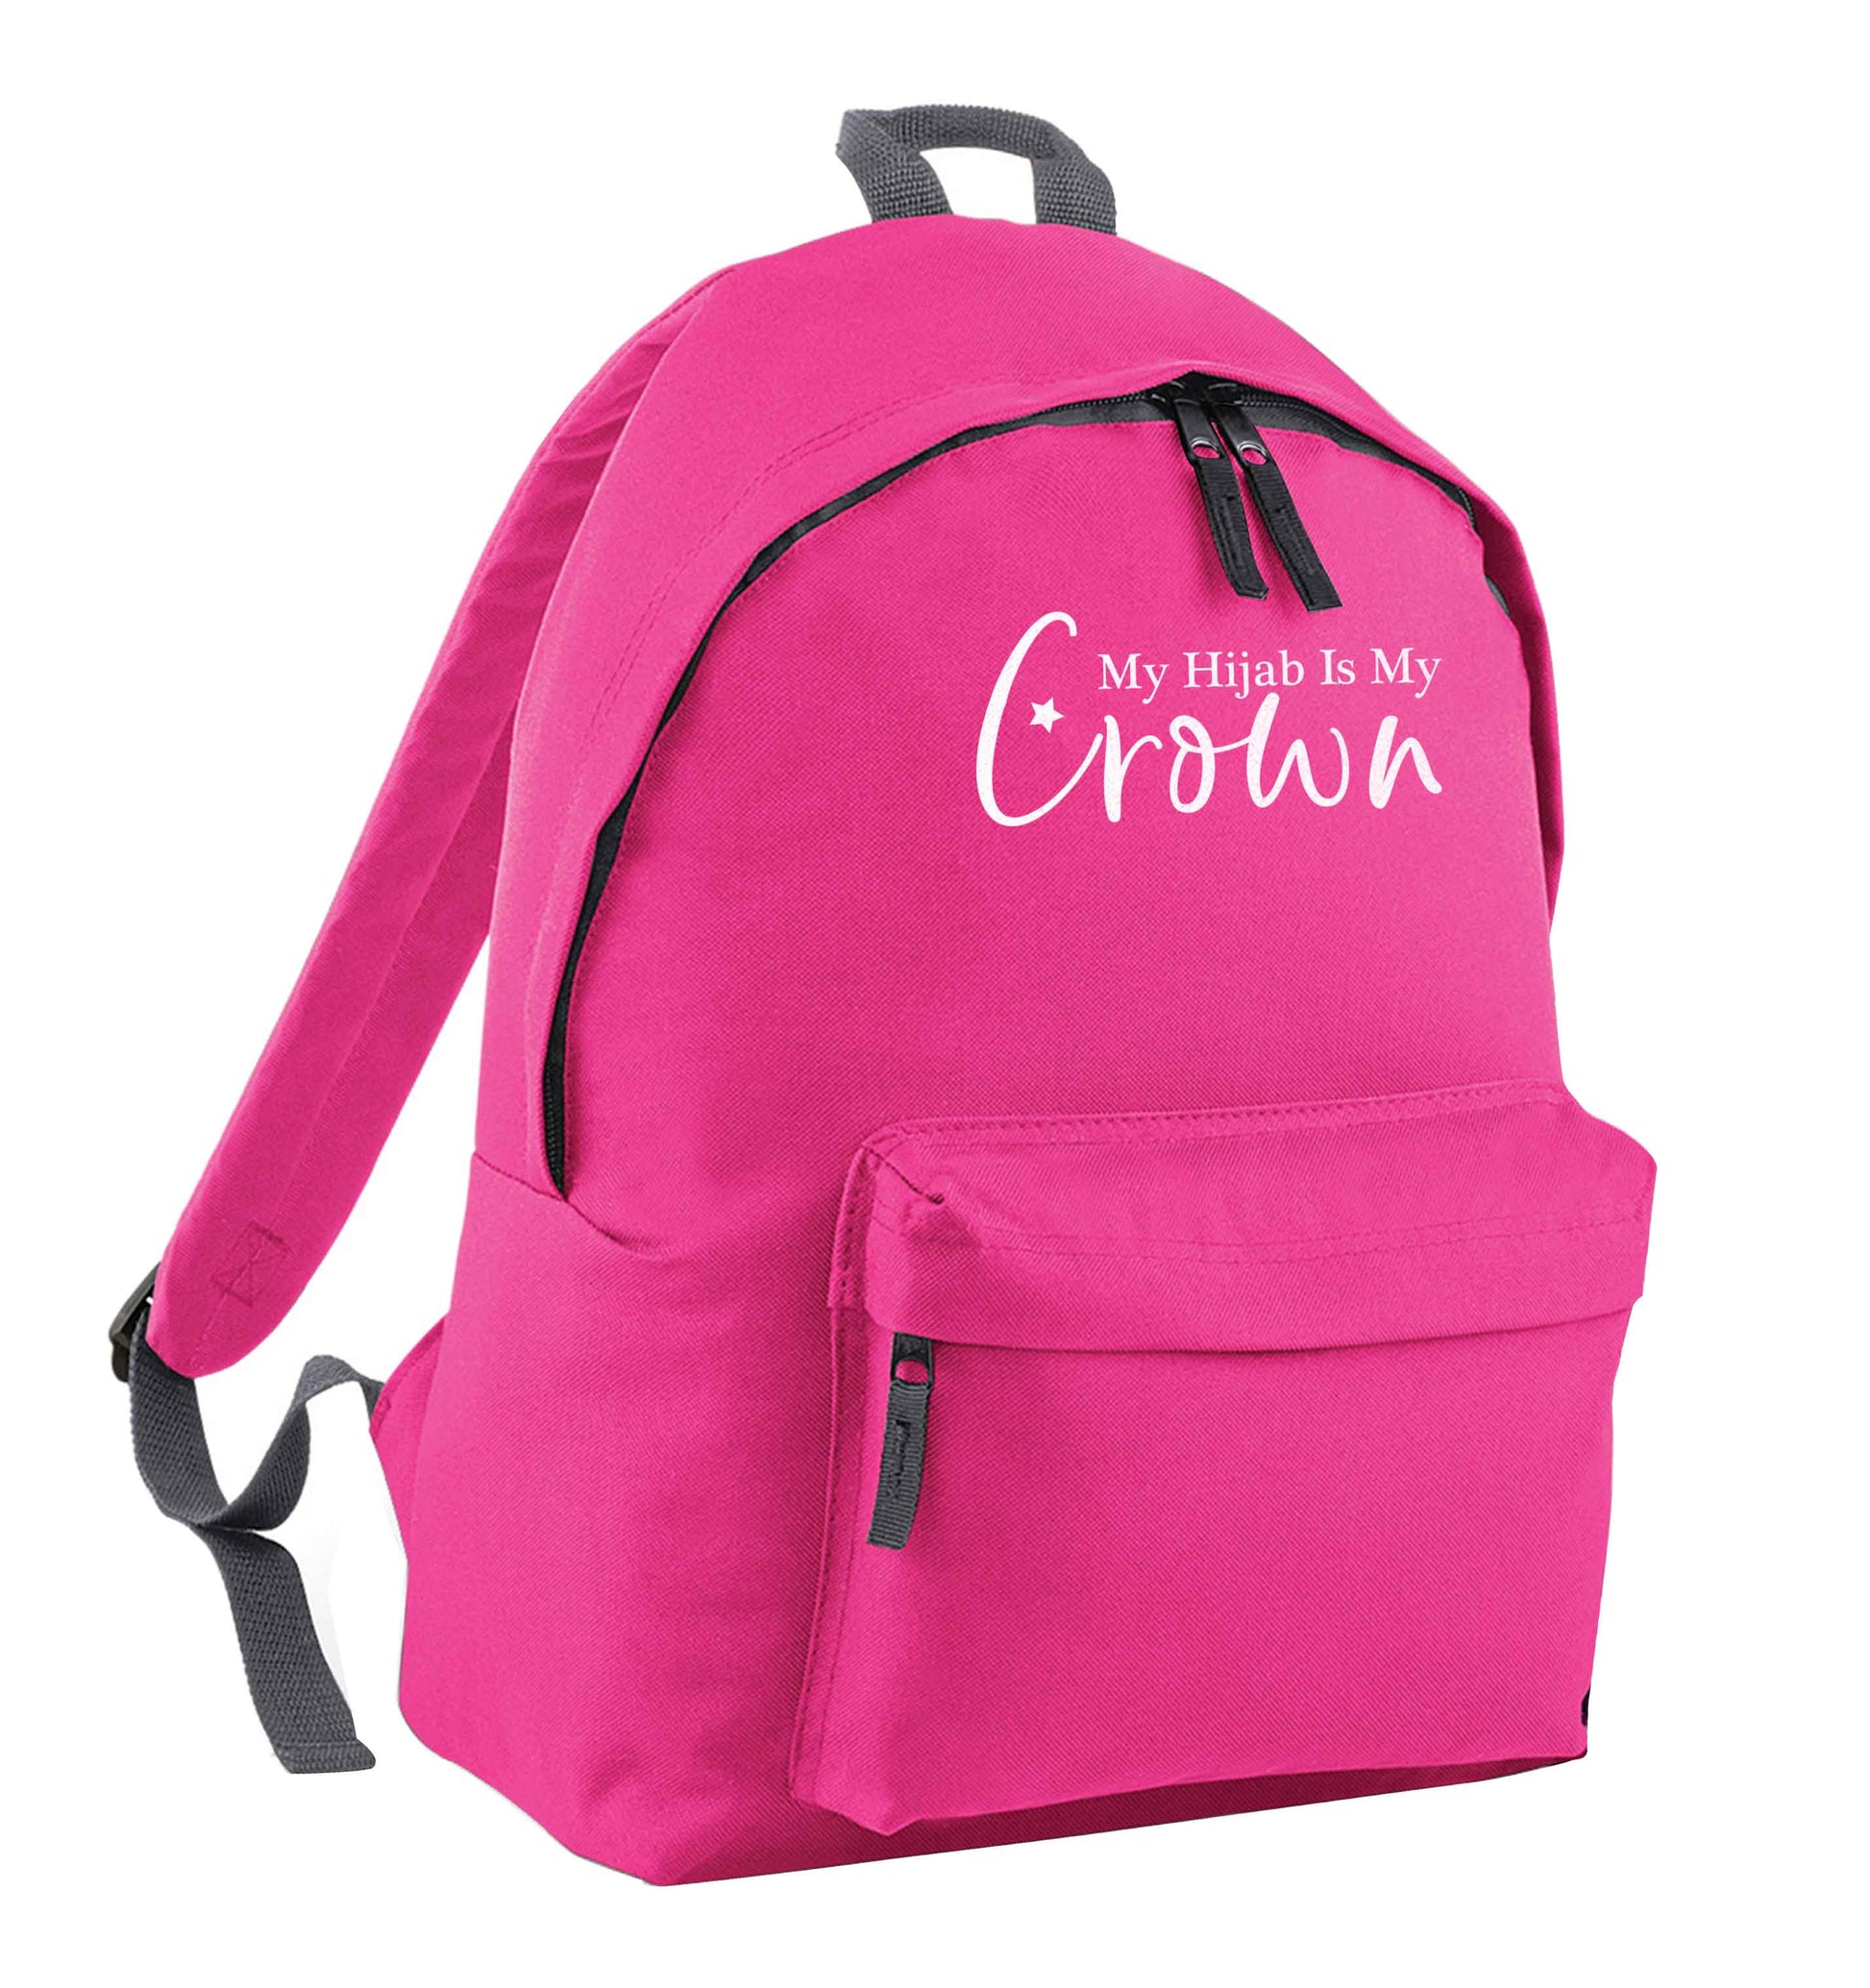 My hijab is my crown pink adults backpack